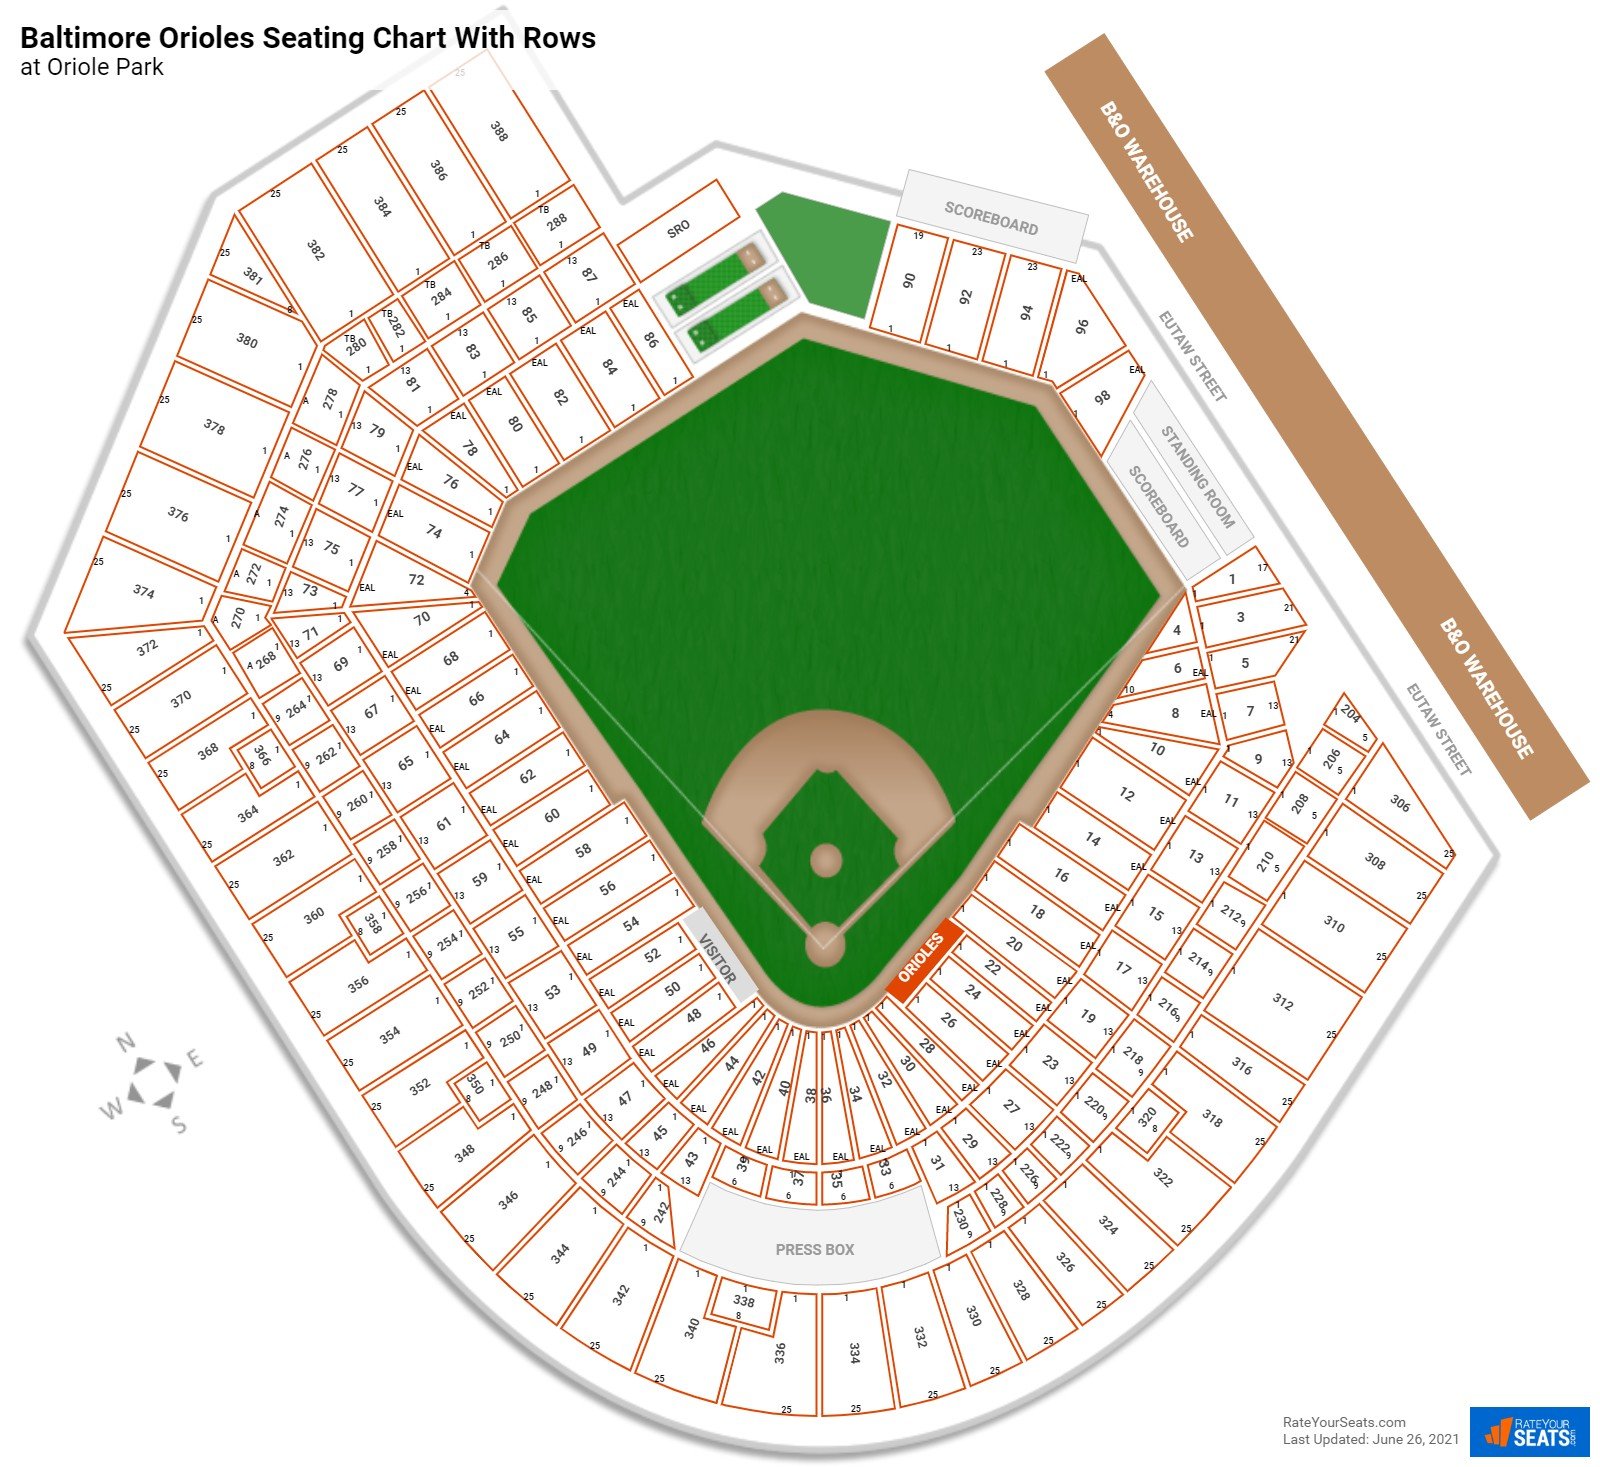 Oriole Park seating chart with row numbers